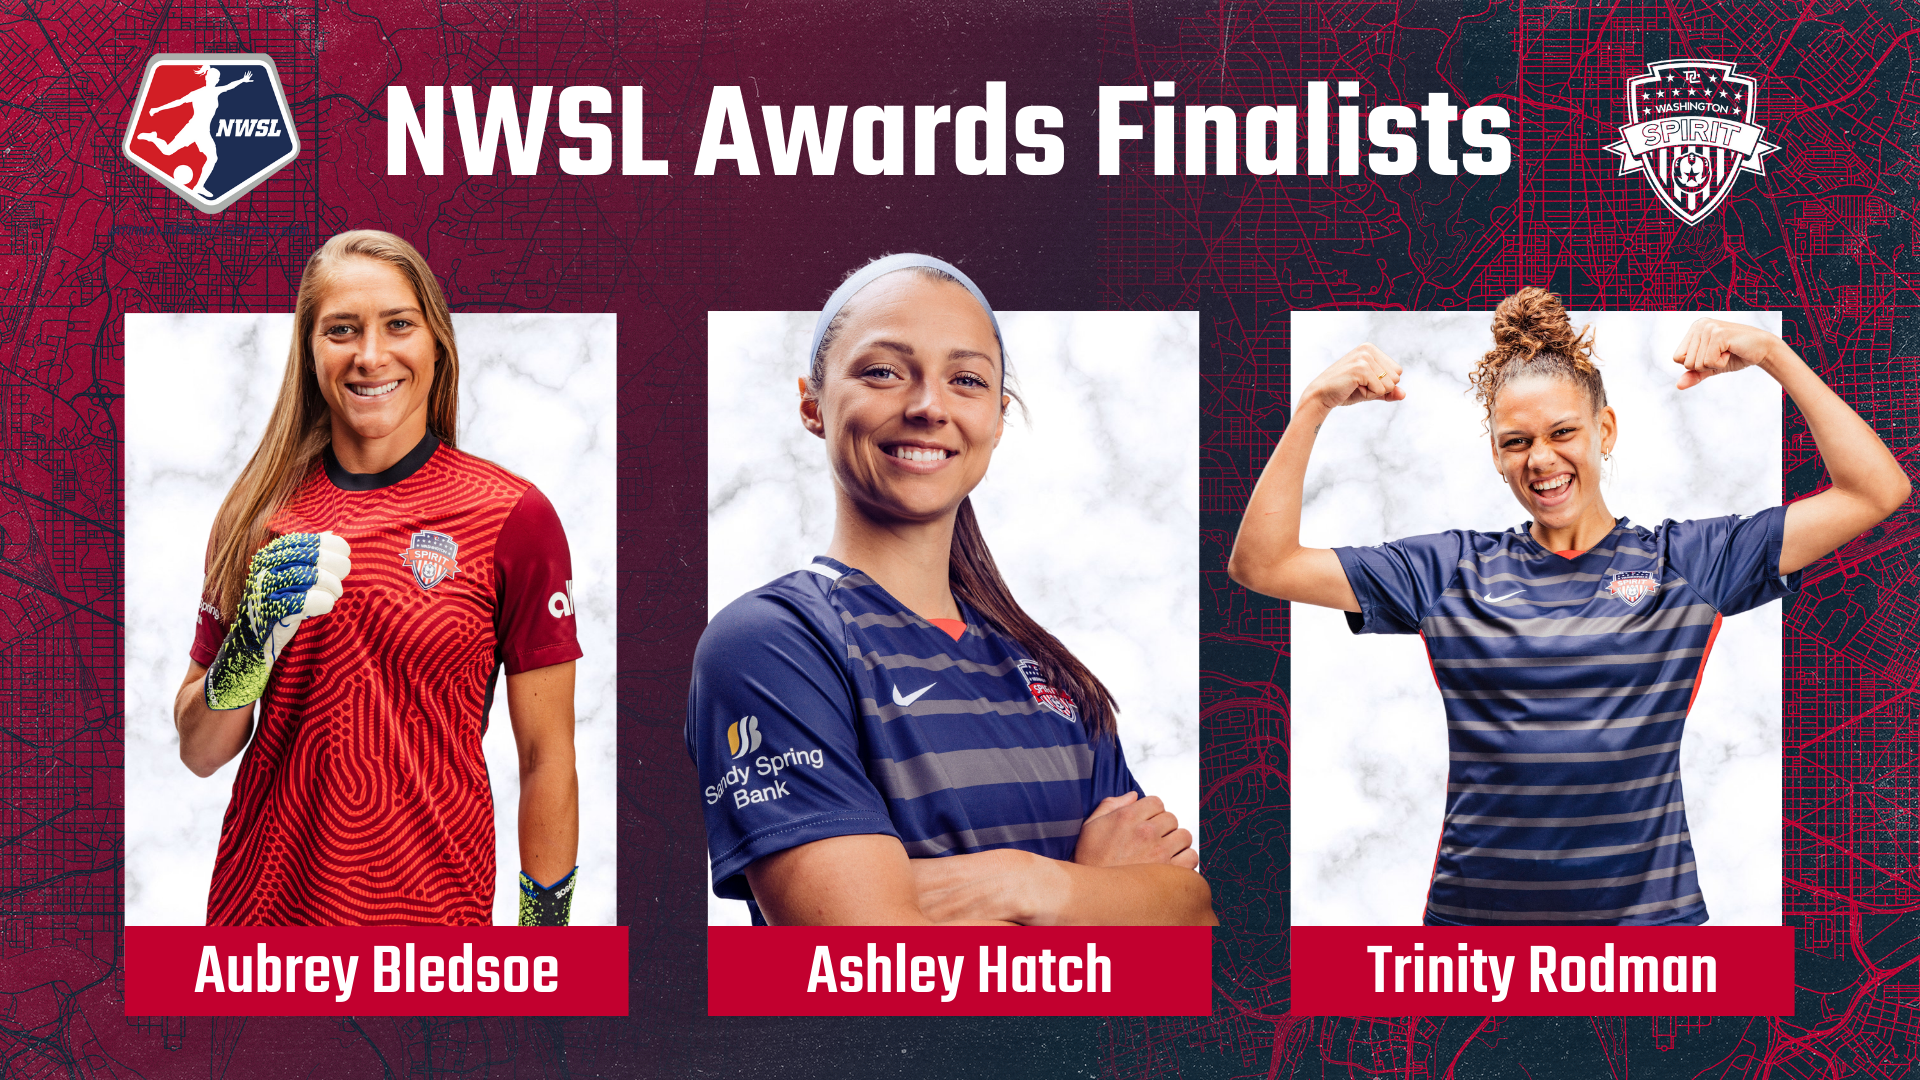 2021 NWSL Awards: Hatch, Bledsoe, and Rodman Reach Final Round Featured Image